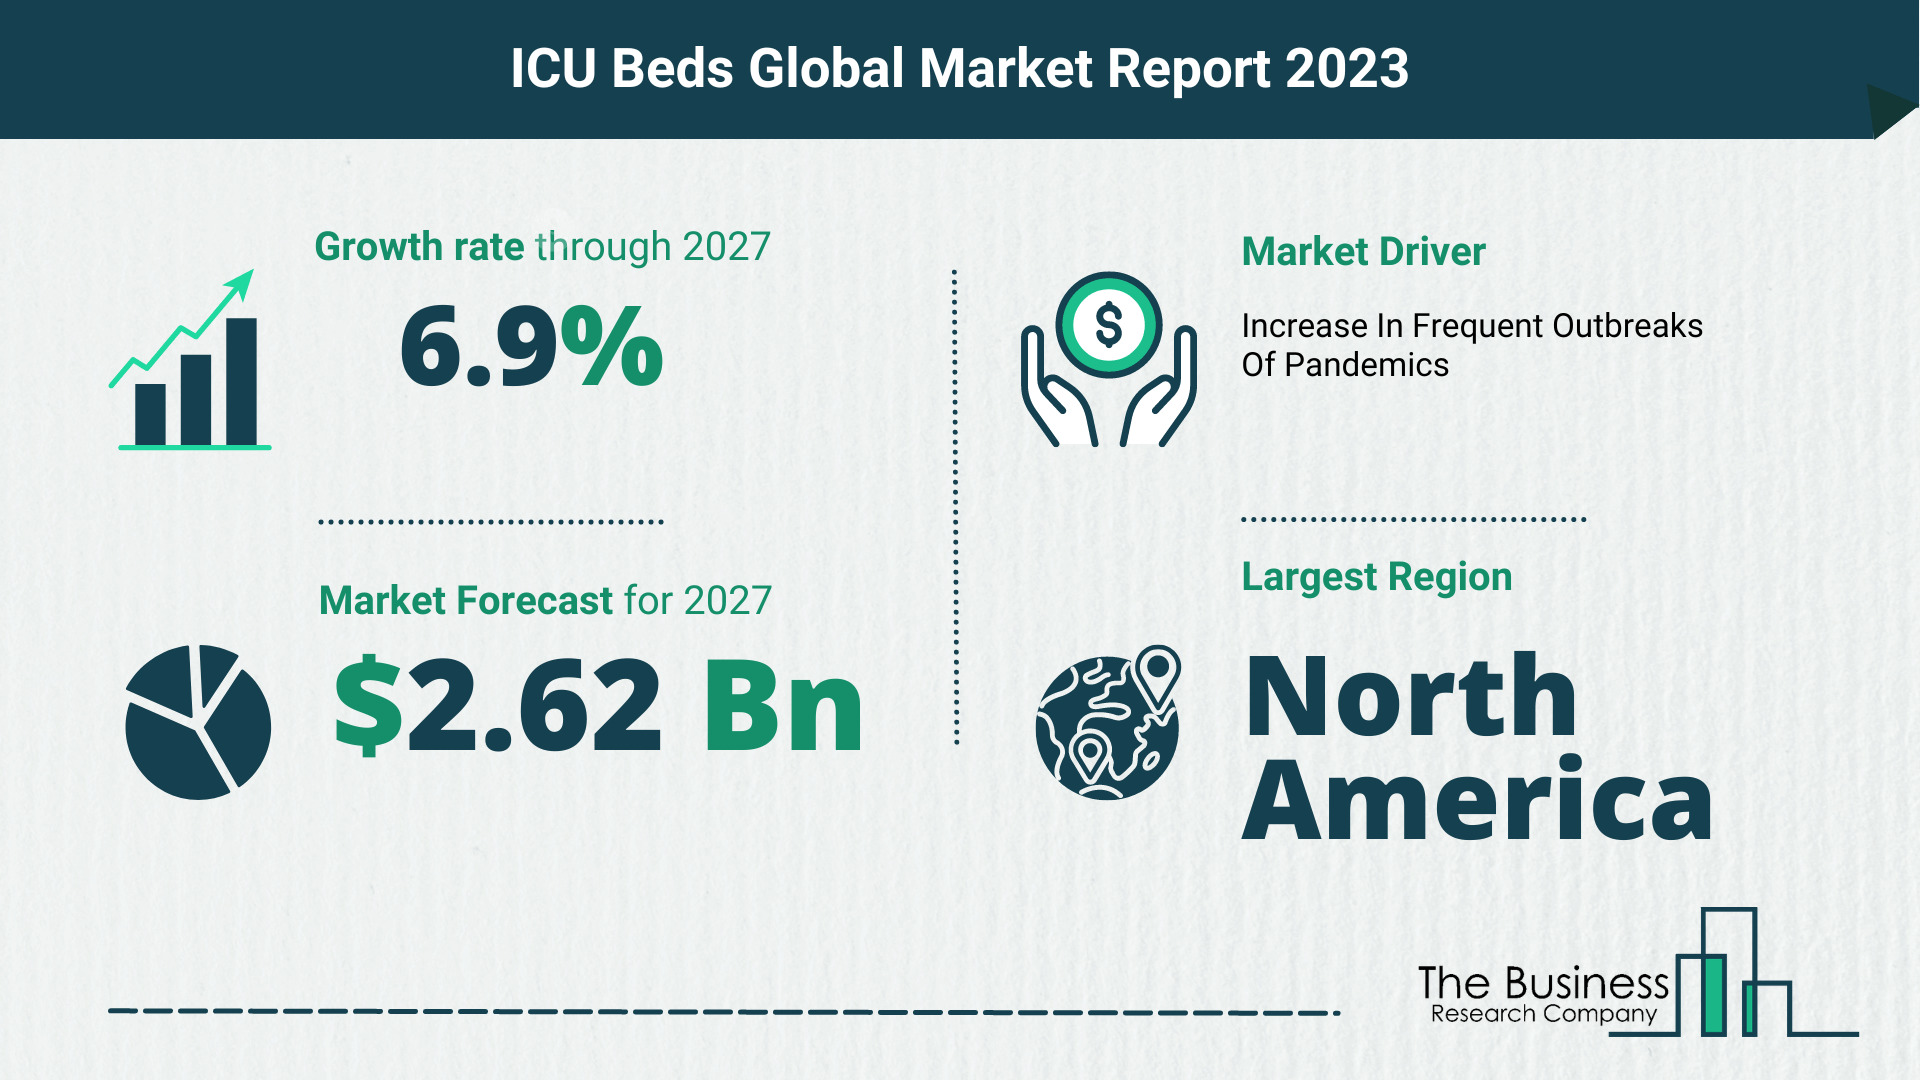 What Will The ICU Beds Market Look Like In 2023?